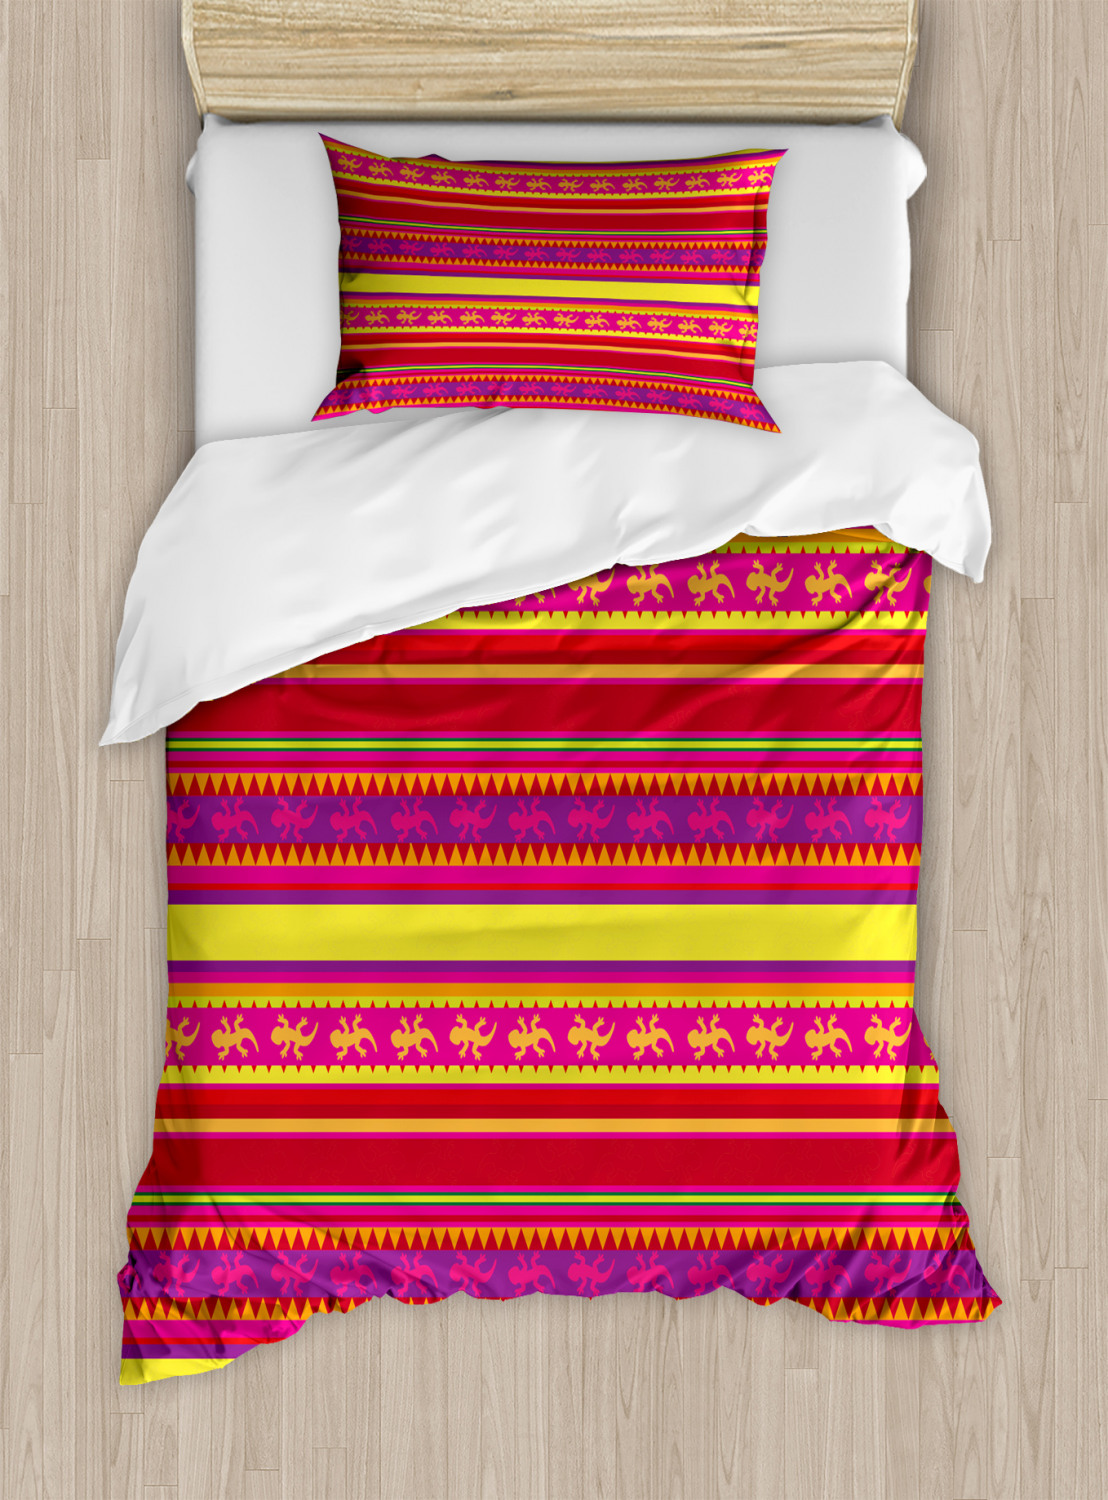 Mexican Duvet Cover Set With Pillow Shams Vibrant Lizard Folklore